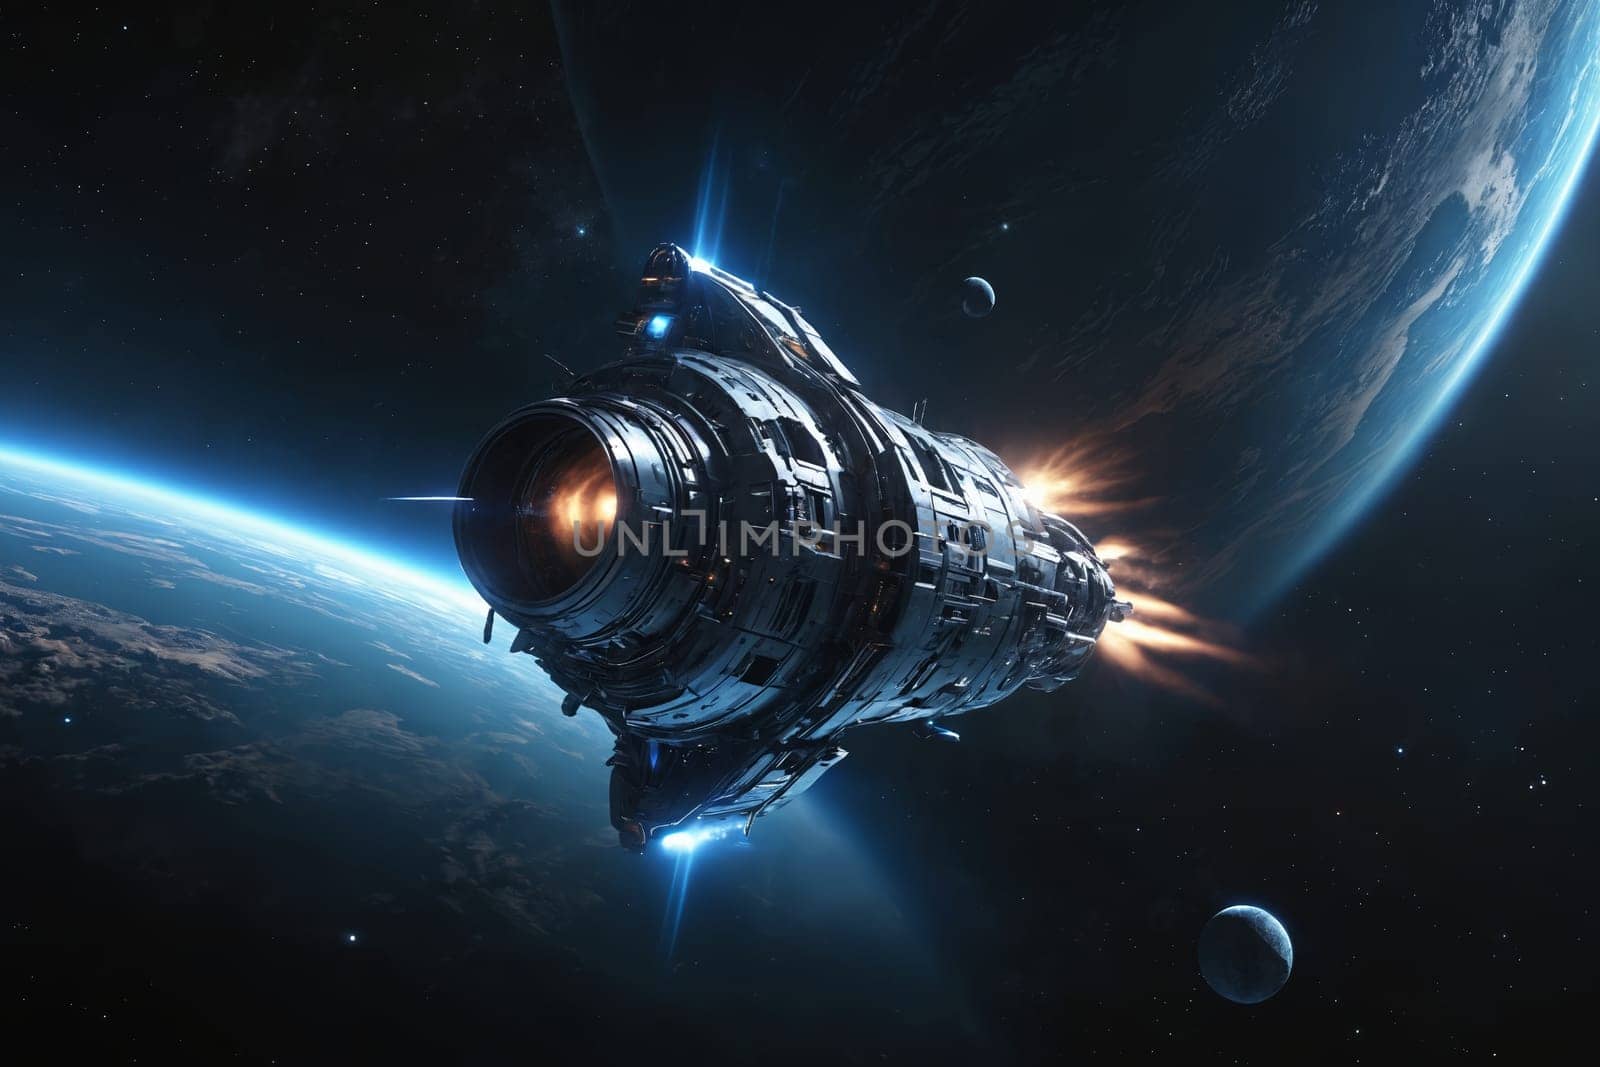 Rendezvous with Art: An Artistically Rendered Spaceship by Andre1ns